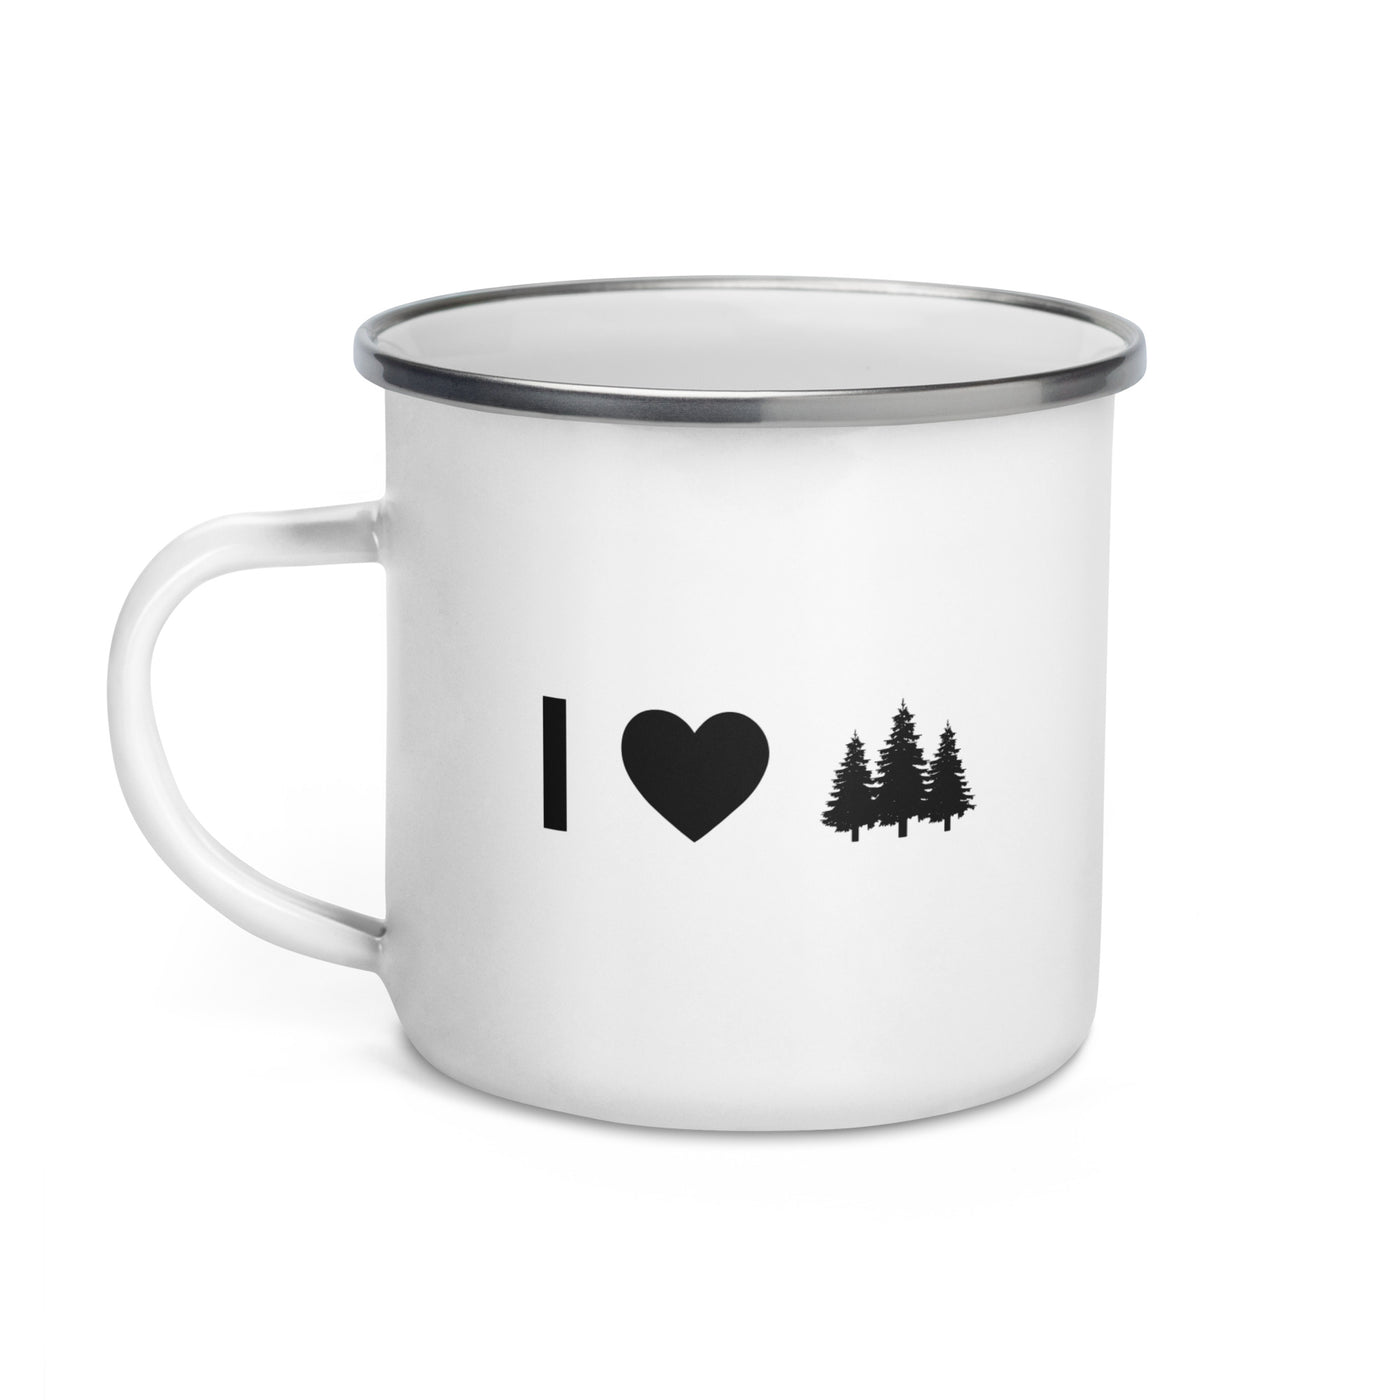 I Heart And Trees - Emaille Tasse camping